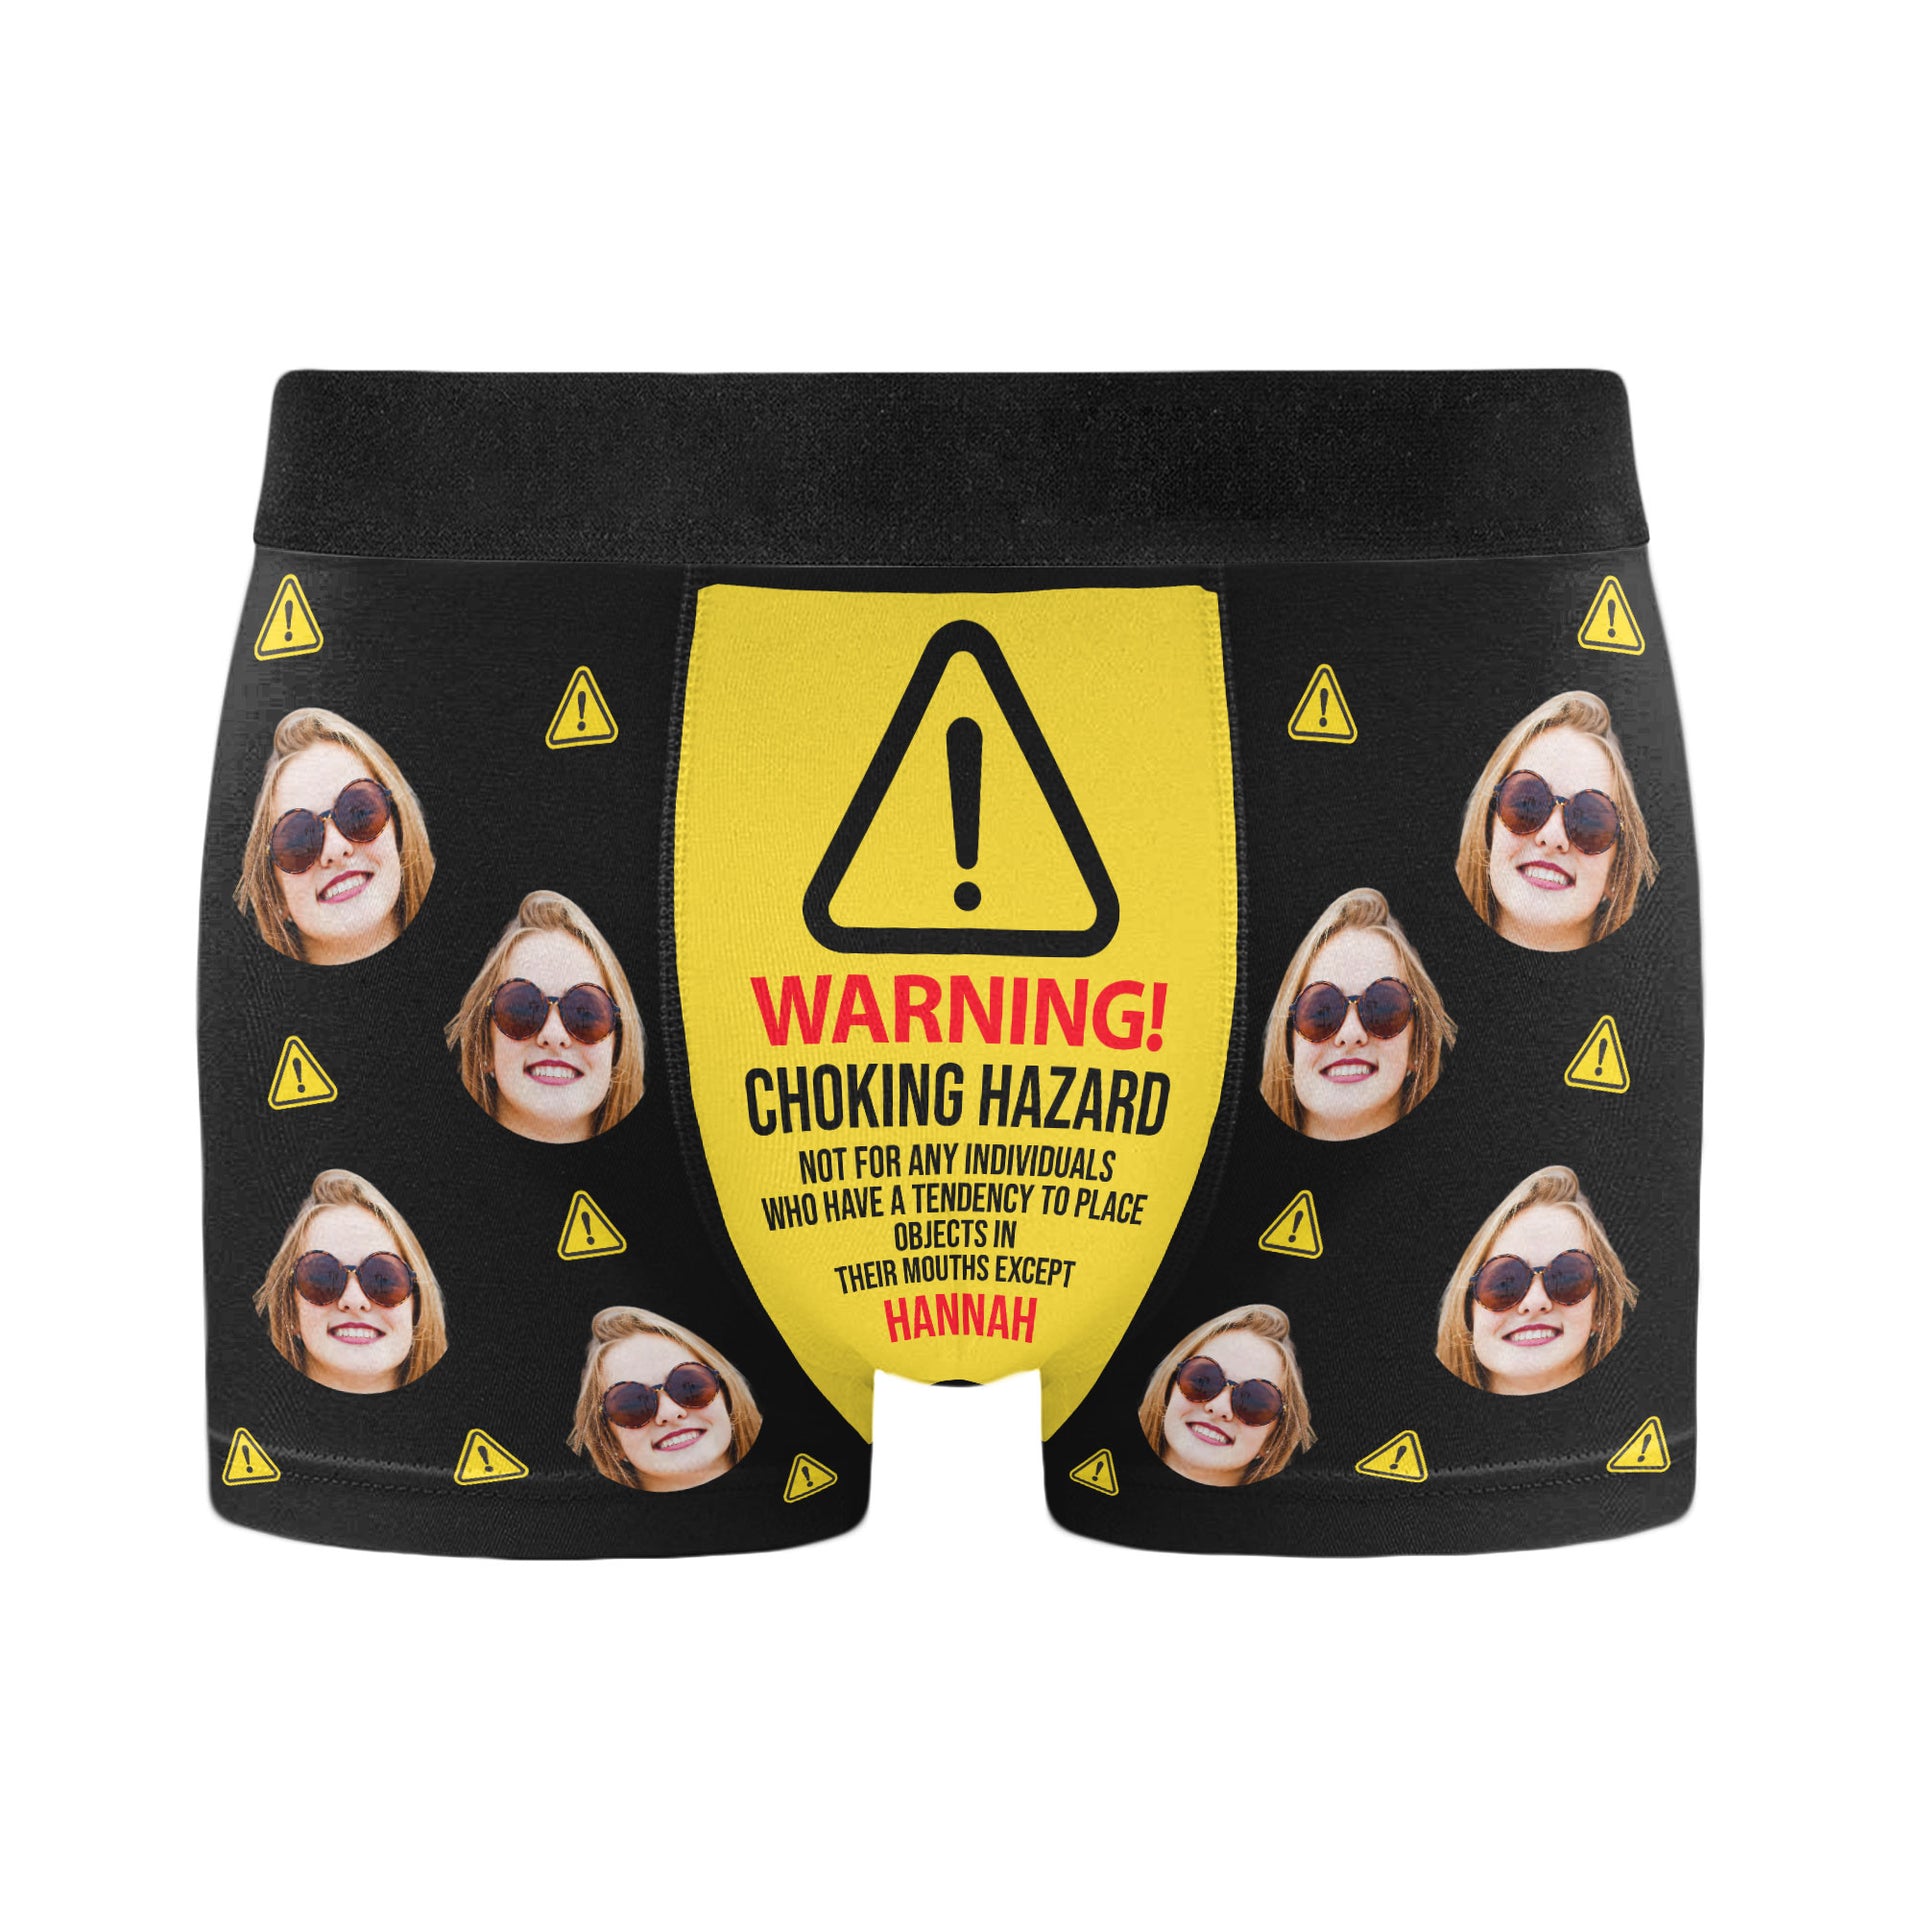 In Case of Emergency Pull Down Boxer Briefs, Funny Boxers, Novelty Boxers,  Gift for Him, Anniversary Gift for Him 